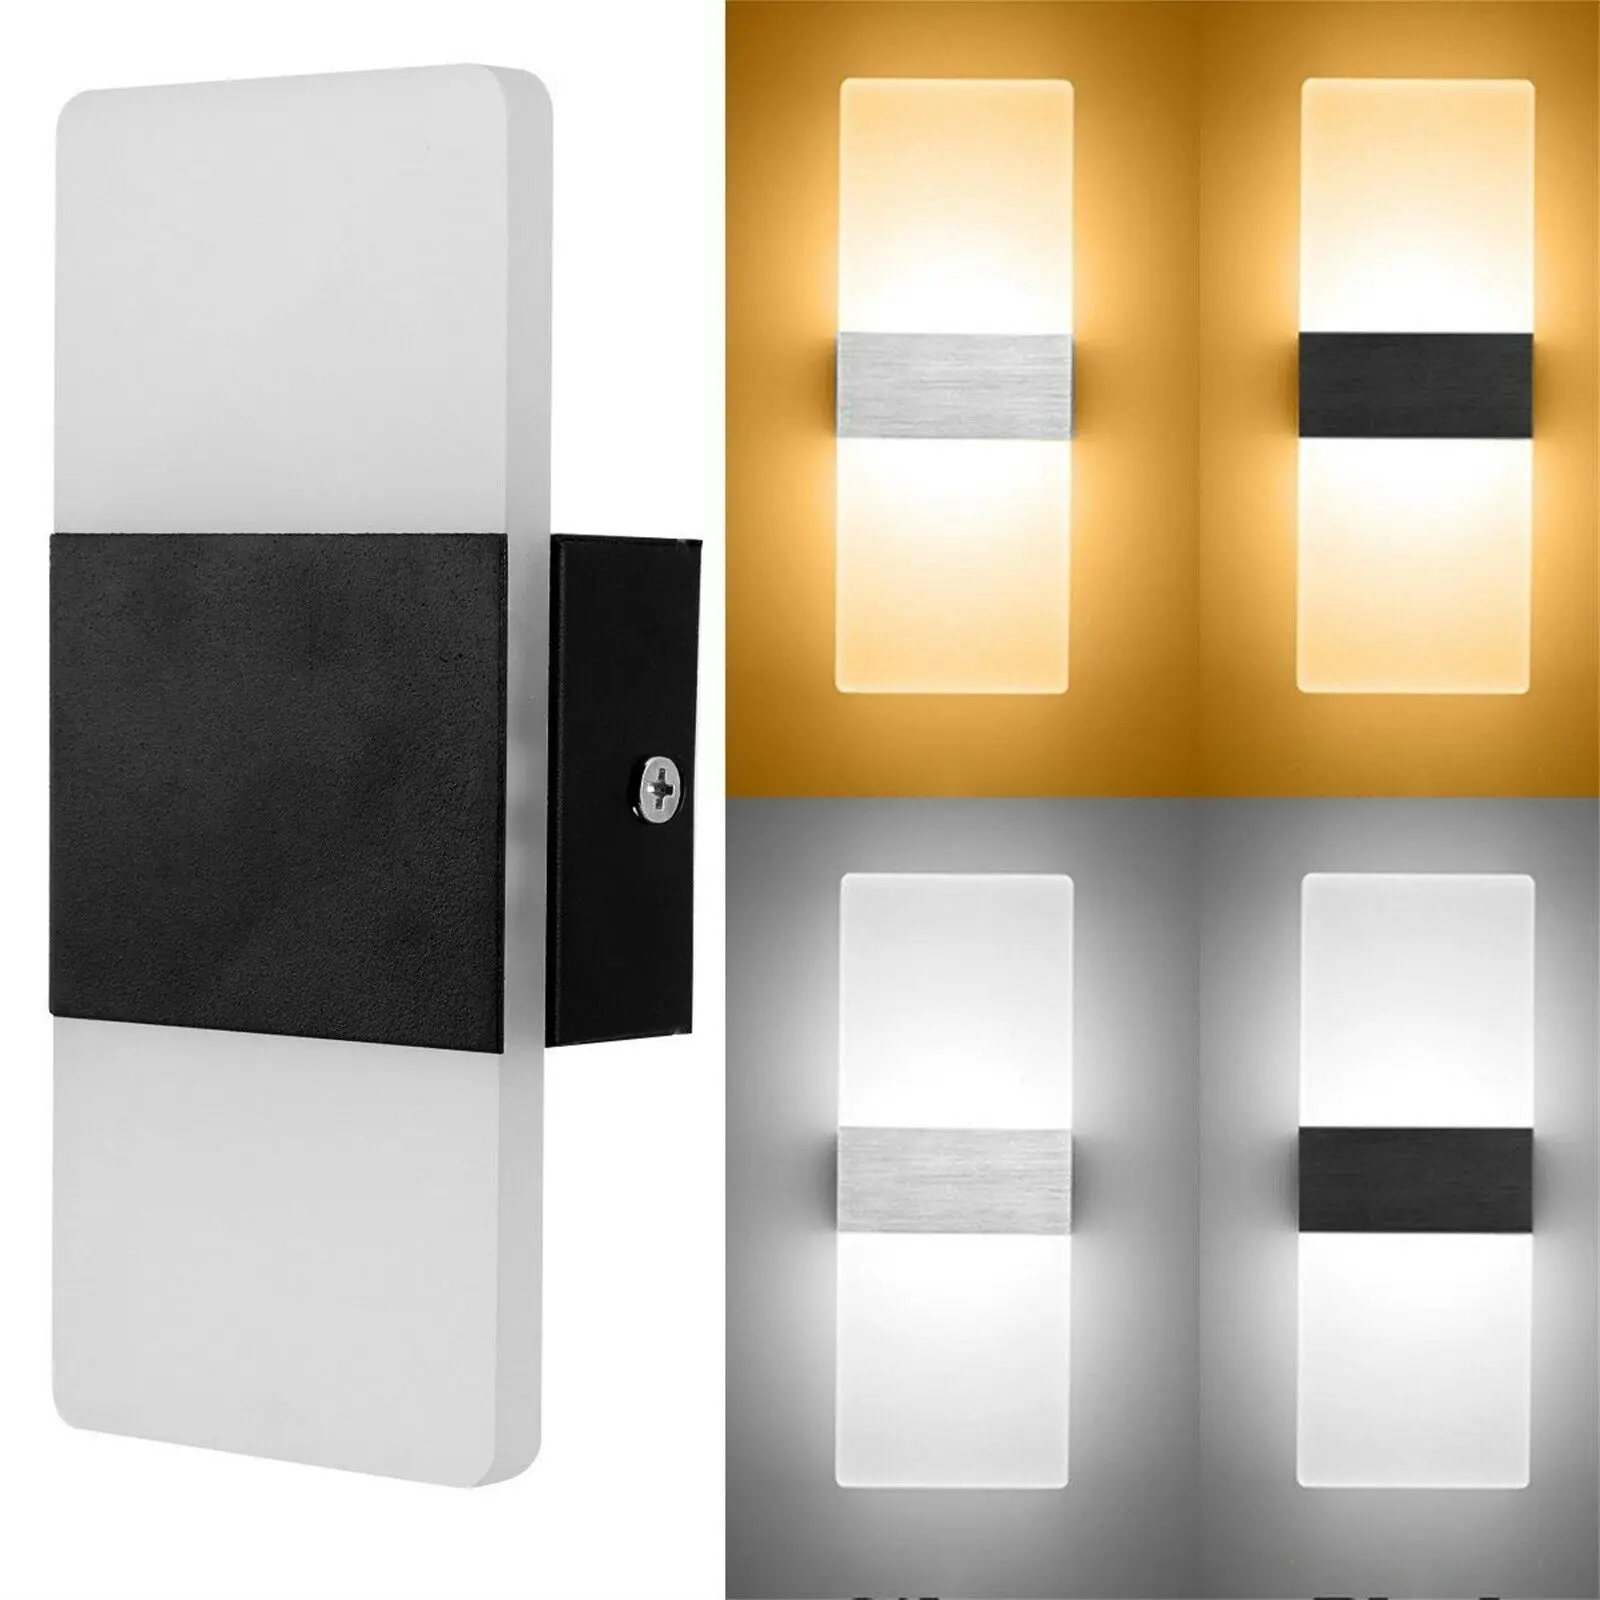 Modern LED Wall Light Up Down Cube Indoor Outdoor Sconce Lighting Lamp Fixture 